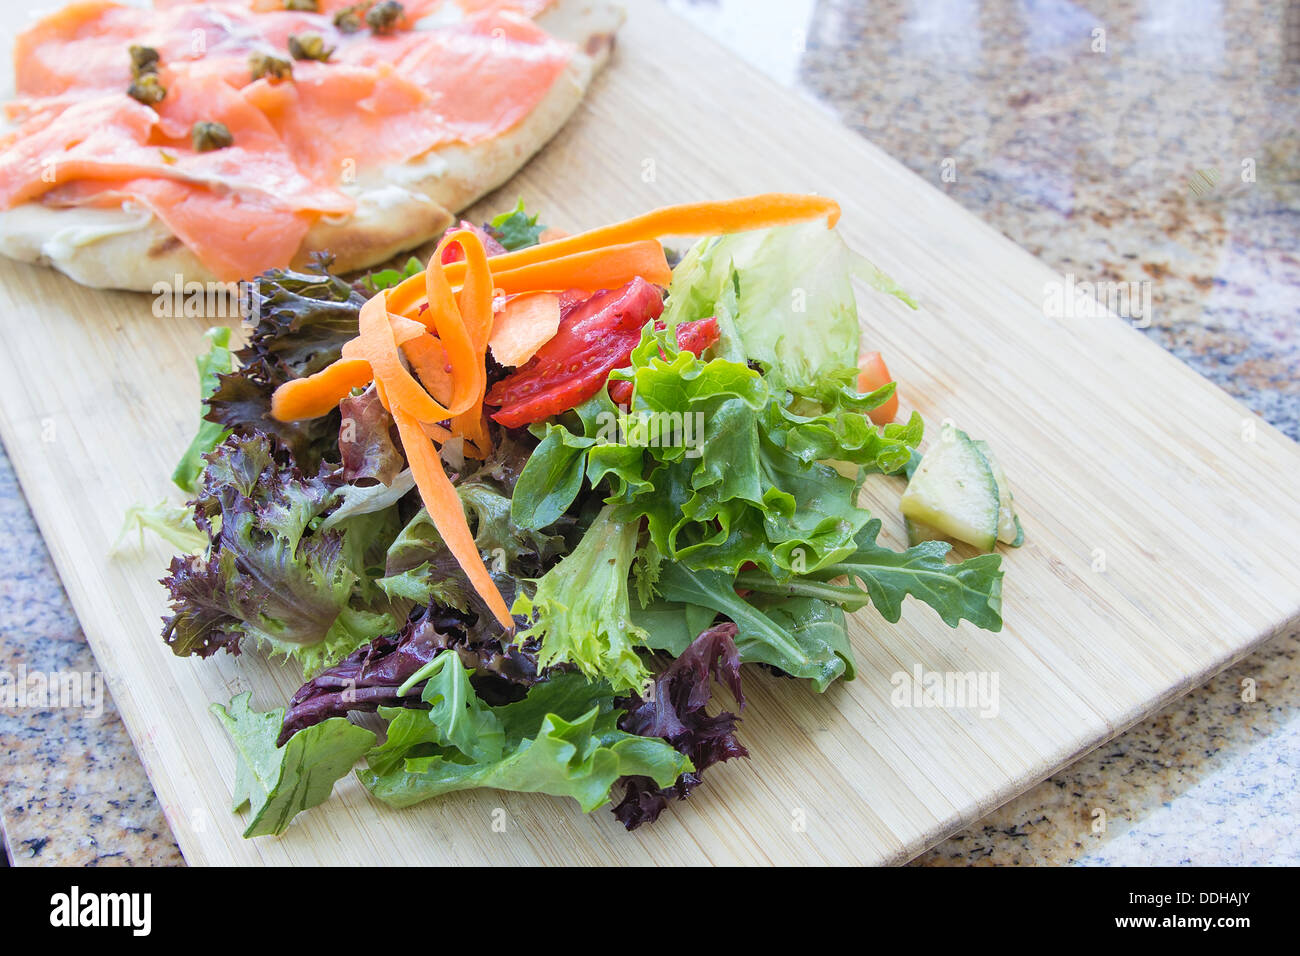 Organic Vegetable Salad with Greens Carrot Strawberry and Smoked Salmon on Focaccia Bread Closeup Stock Photo